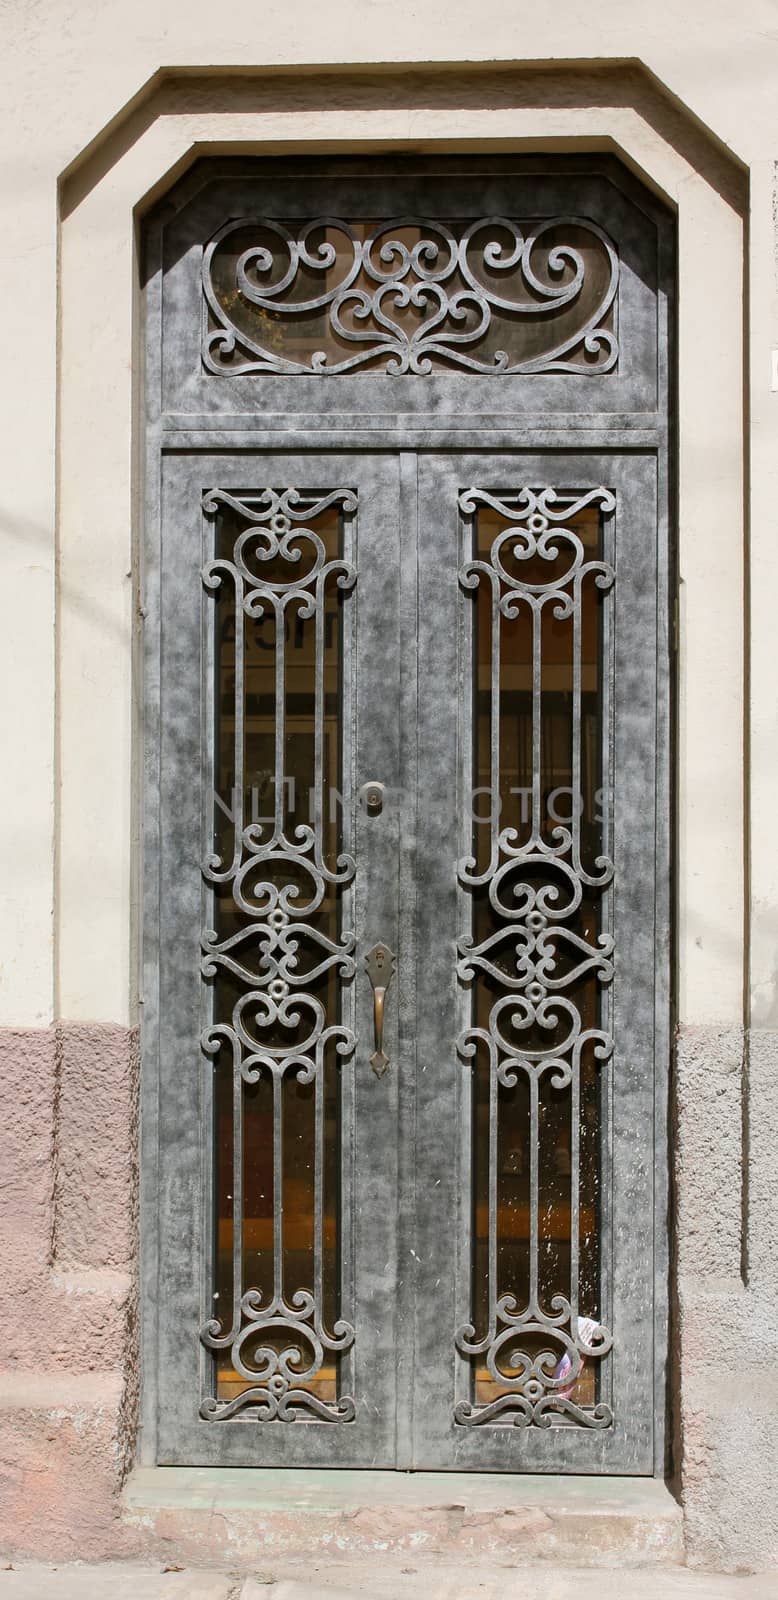 A decorative and aged wrought iron entry door.